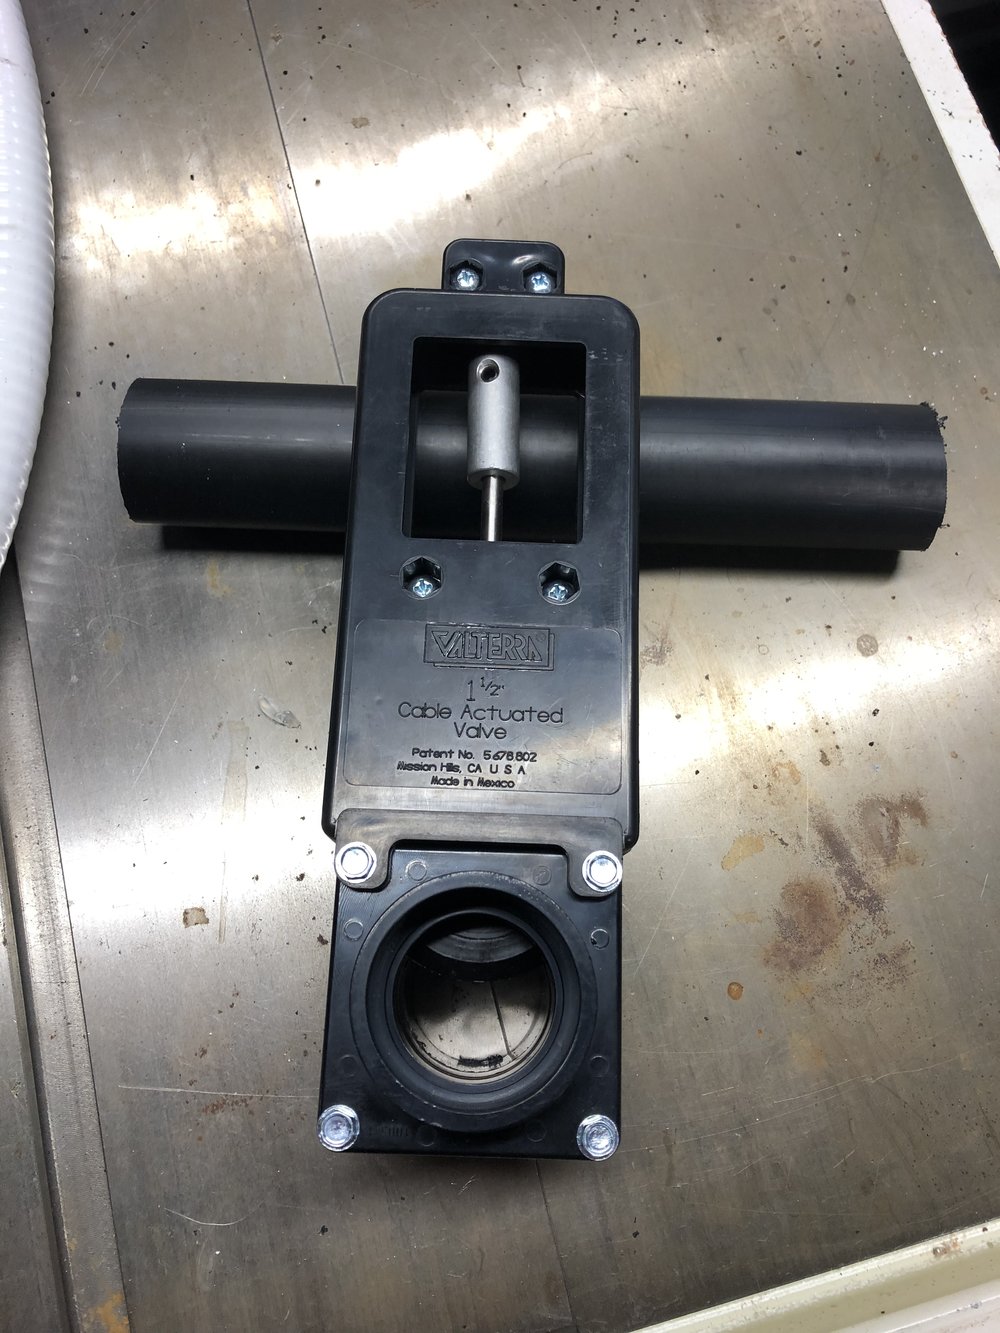 Cable actuated valve